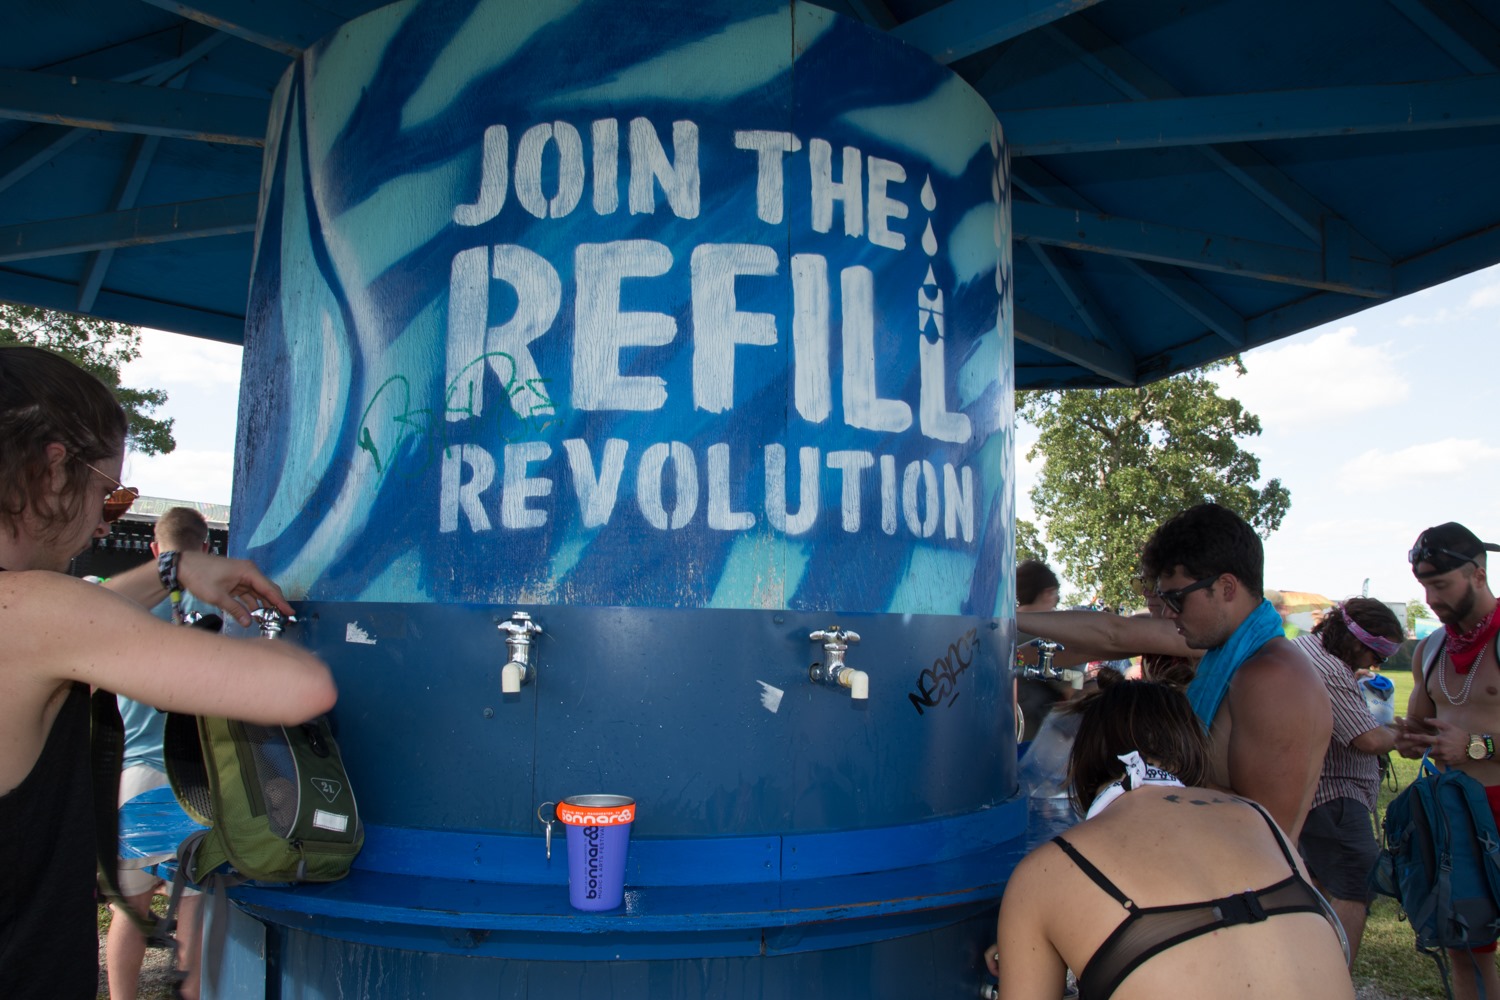 this photo shows the rising popularity of refillable water bottles in response to the plastic pollution crisis